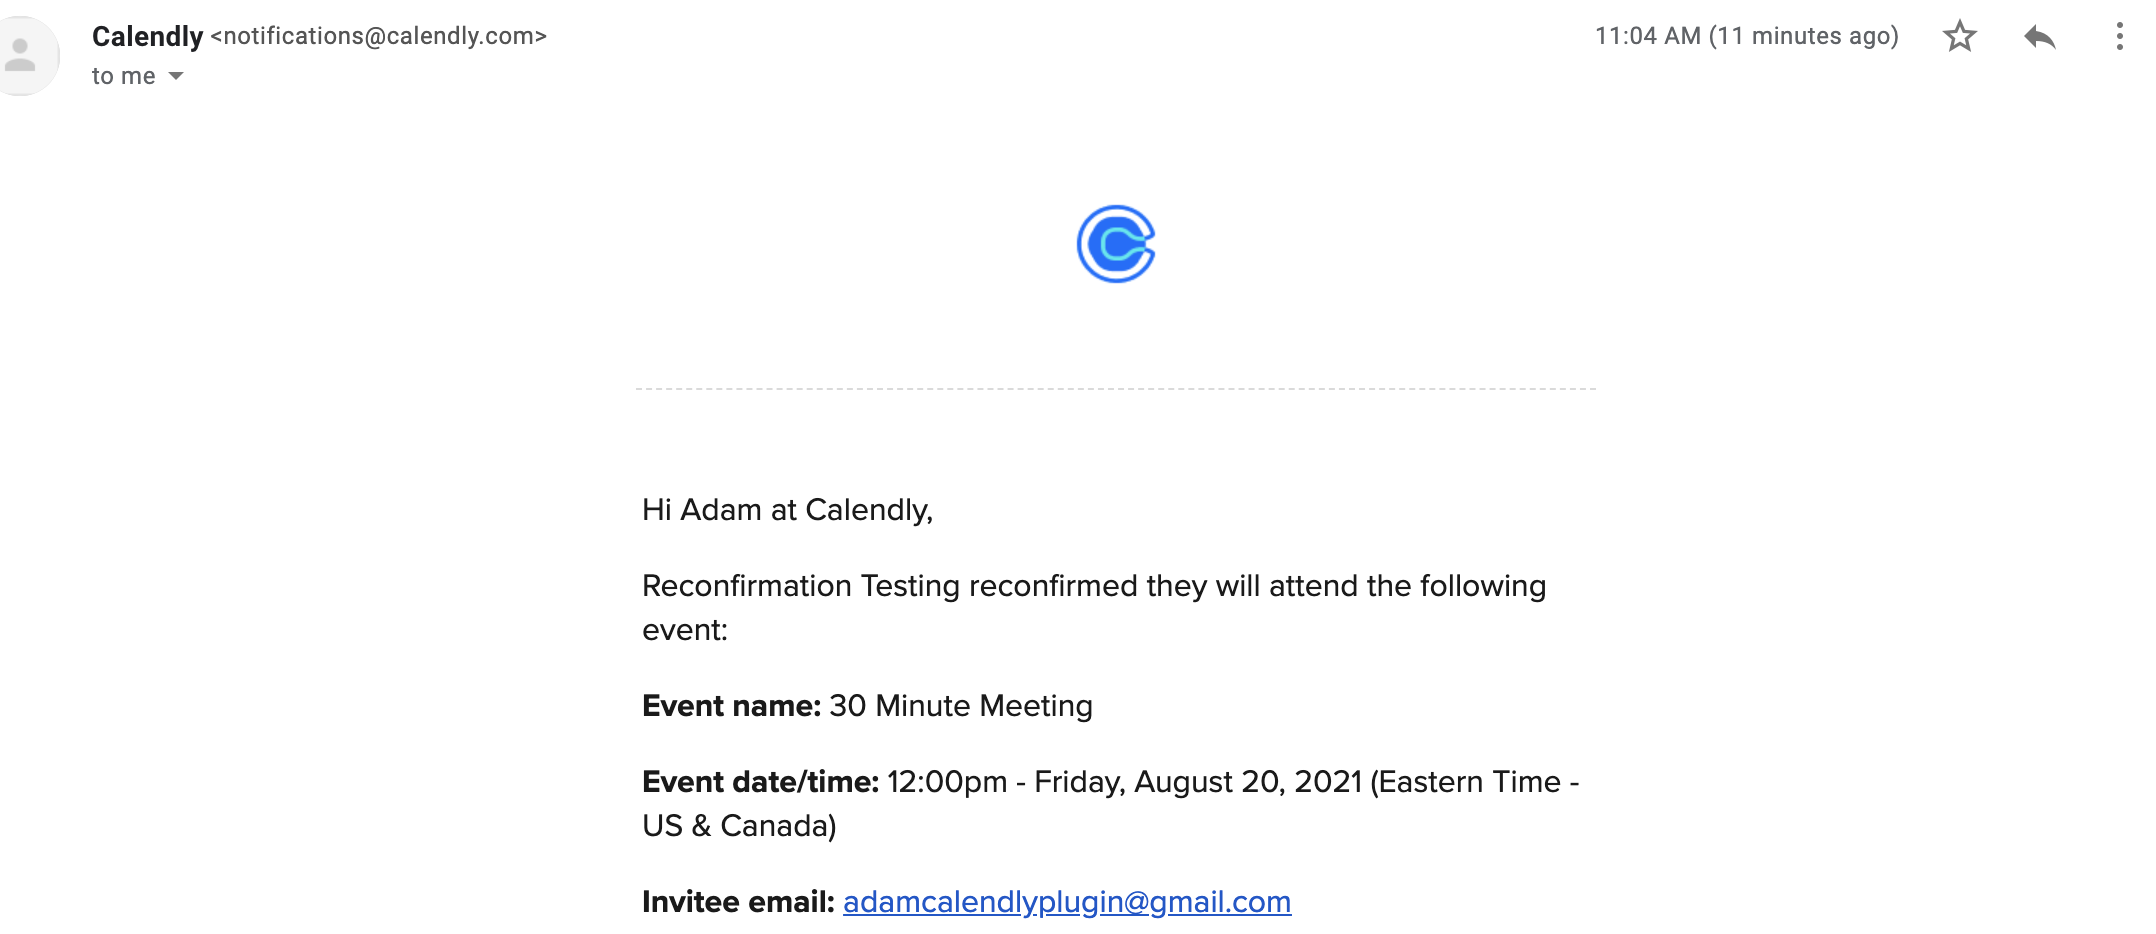 Reconfirmation_Testing_reconfirmed_attendance_for_30_Minute_Meeting_on_August_20__2021_-_adamcalendlytestgmail.com_-_Gmail_2021-08-17_11-15-58.png